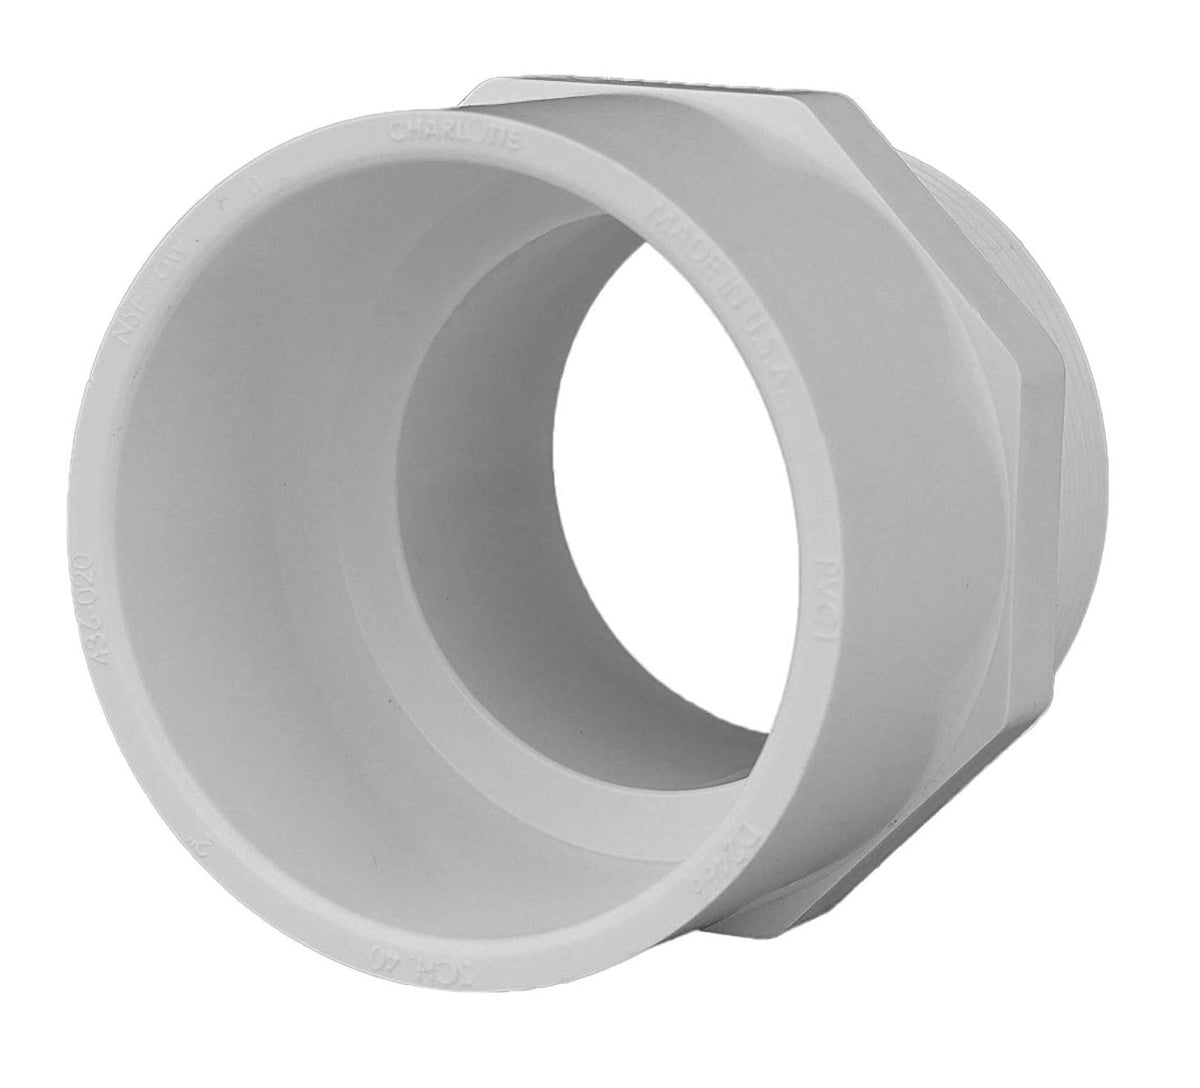 Charlotte Pipe PVC 02109 1800HA Male Adapter Pipe Fitting, White, 3 Inch